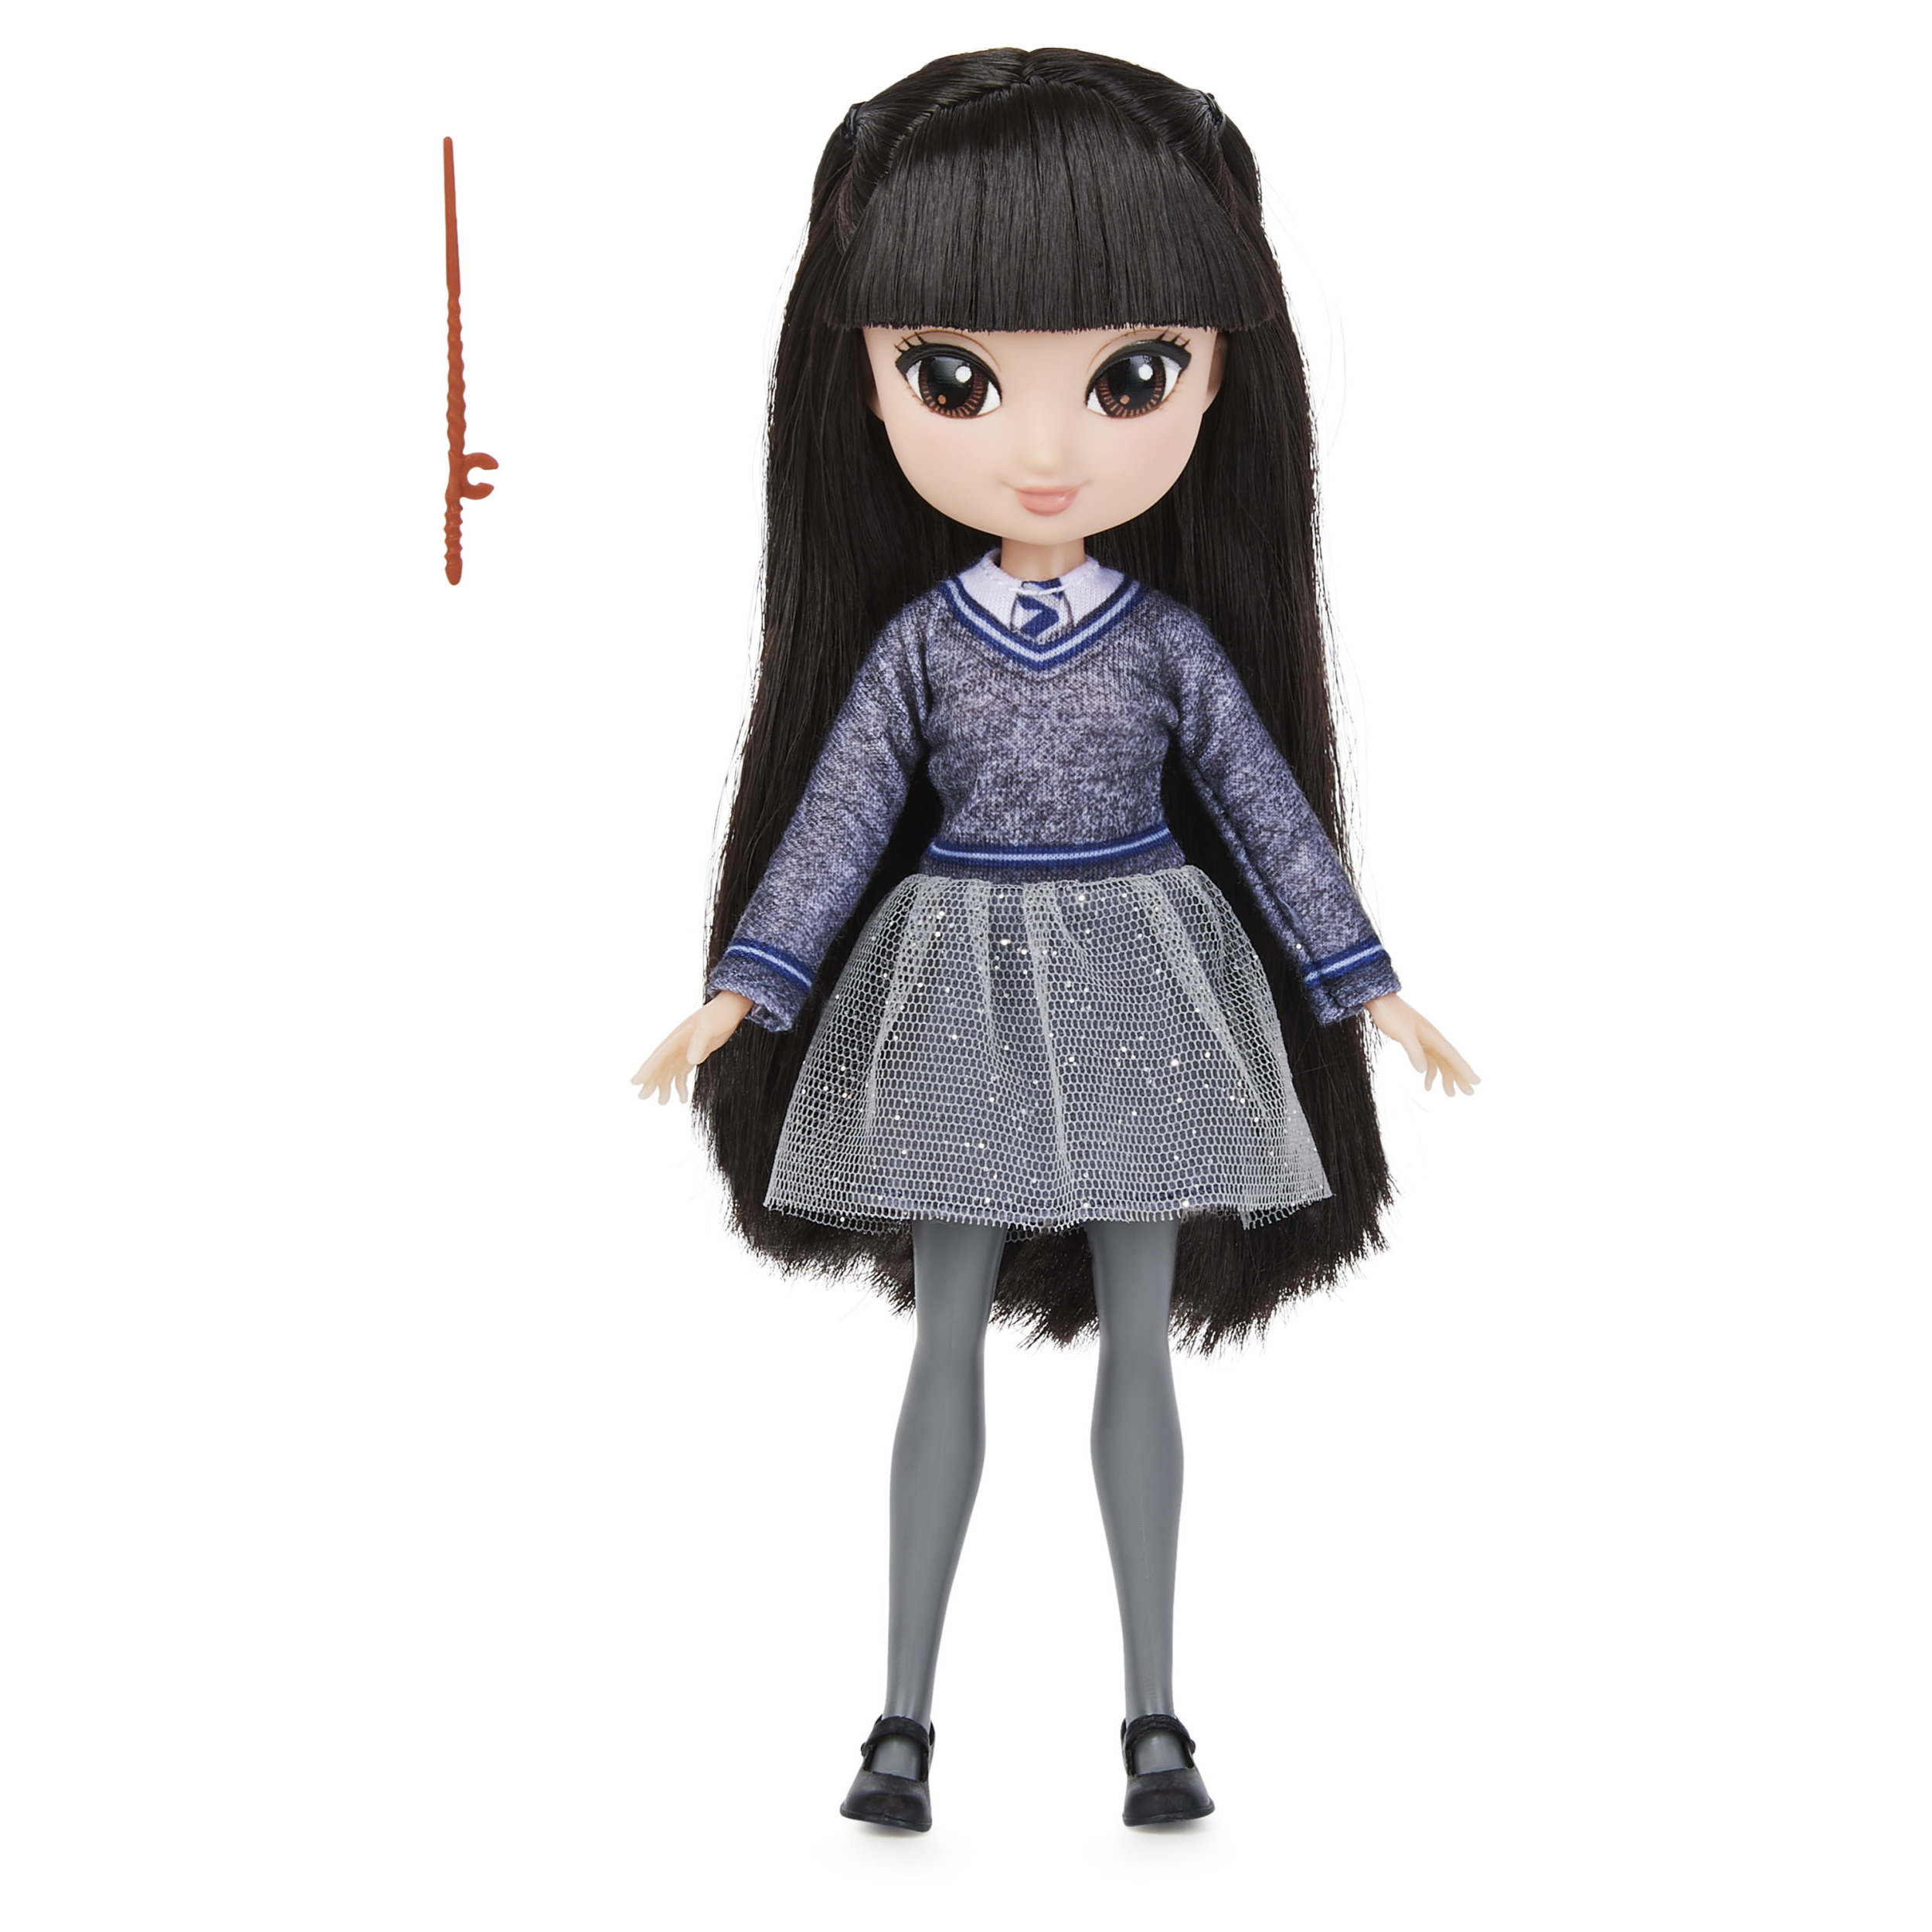 SPIN MASTER - Wizarding World Harry Potter, 8-inch Tall Cho Chang Doll, Kids Toys for Ages 5 and up